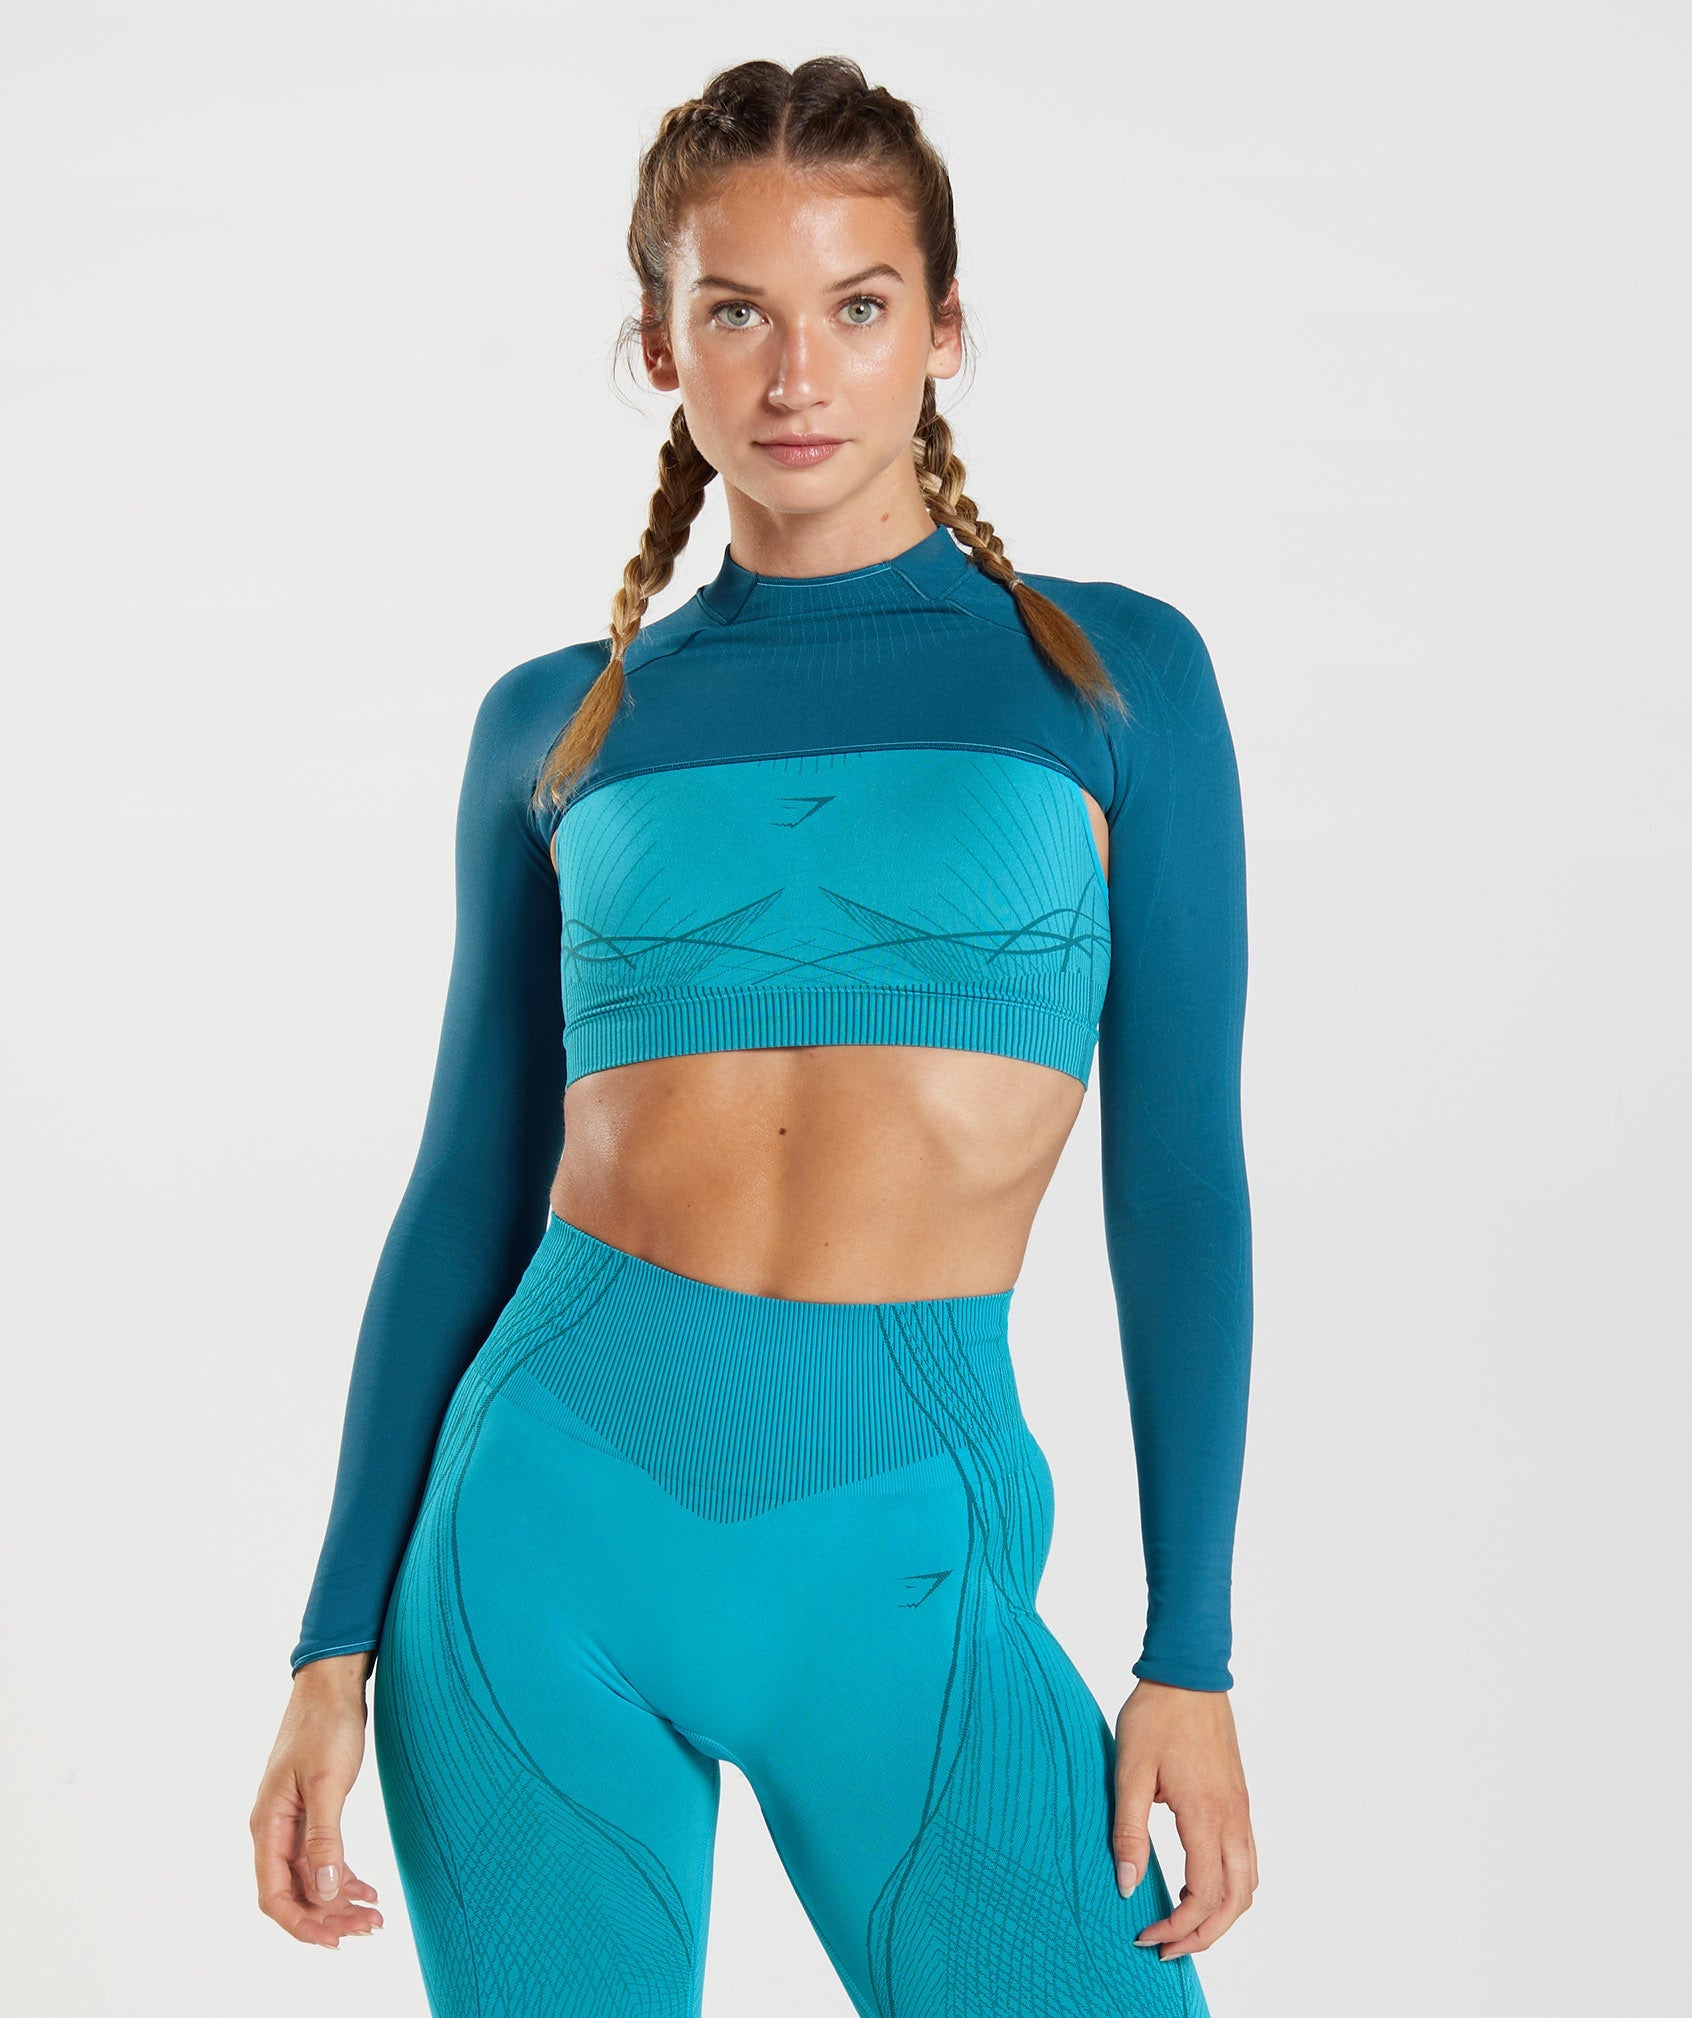 Gymshark seamless for 12$ on Aliexpress ?!?